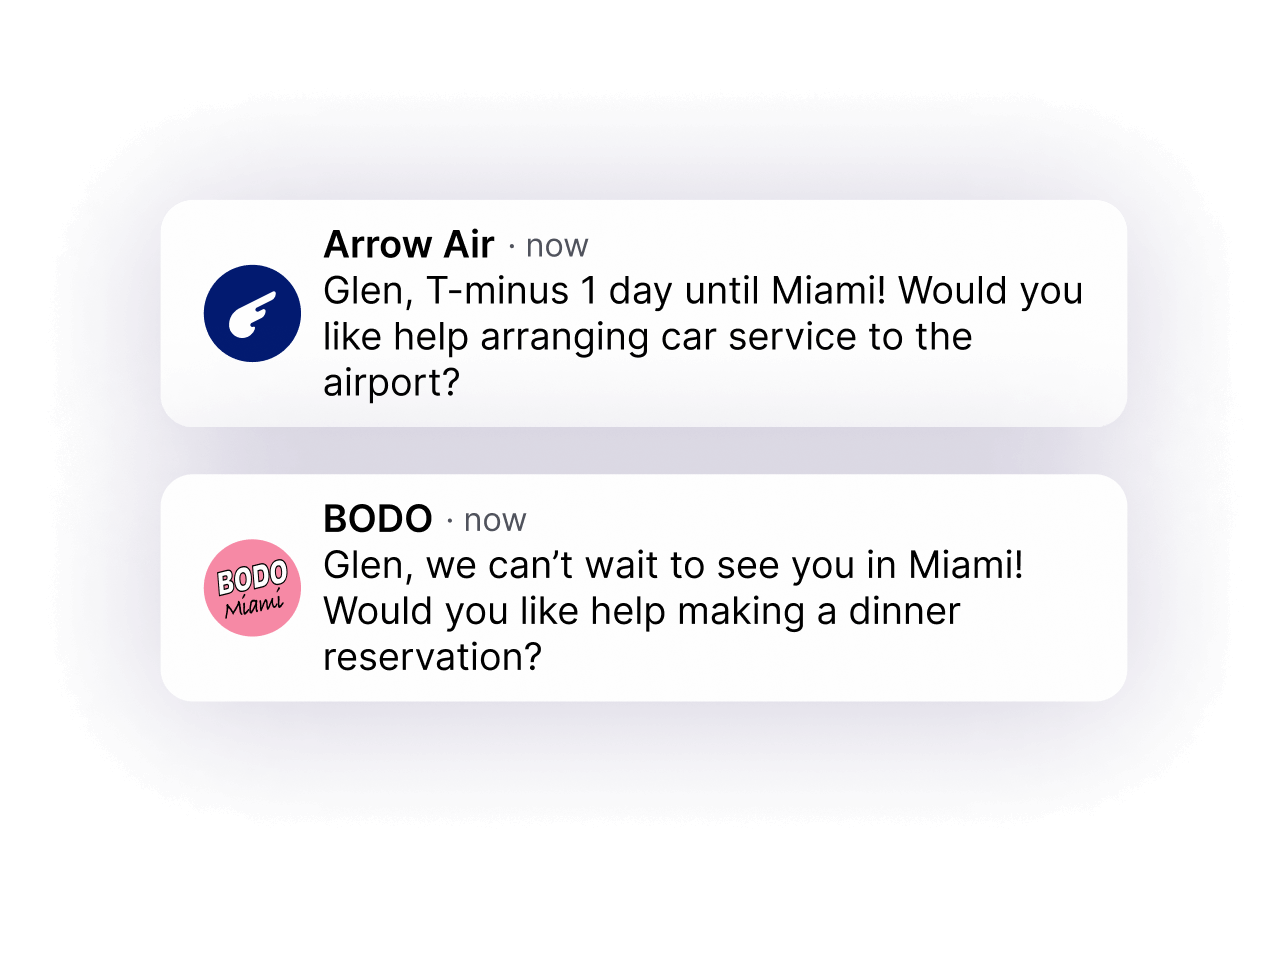 conversational ai platform providing proactive notifications about arranging car and dinner reservations, using natural language understanding